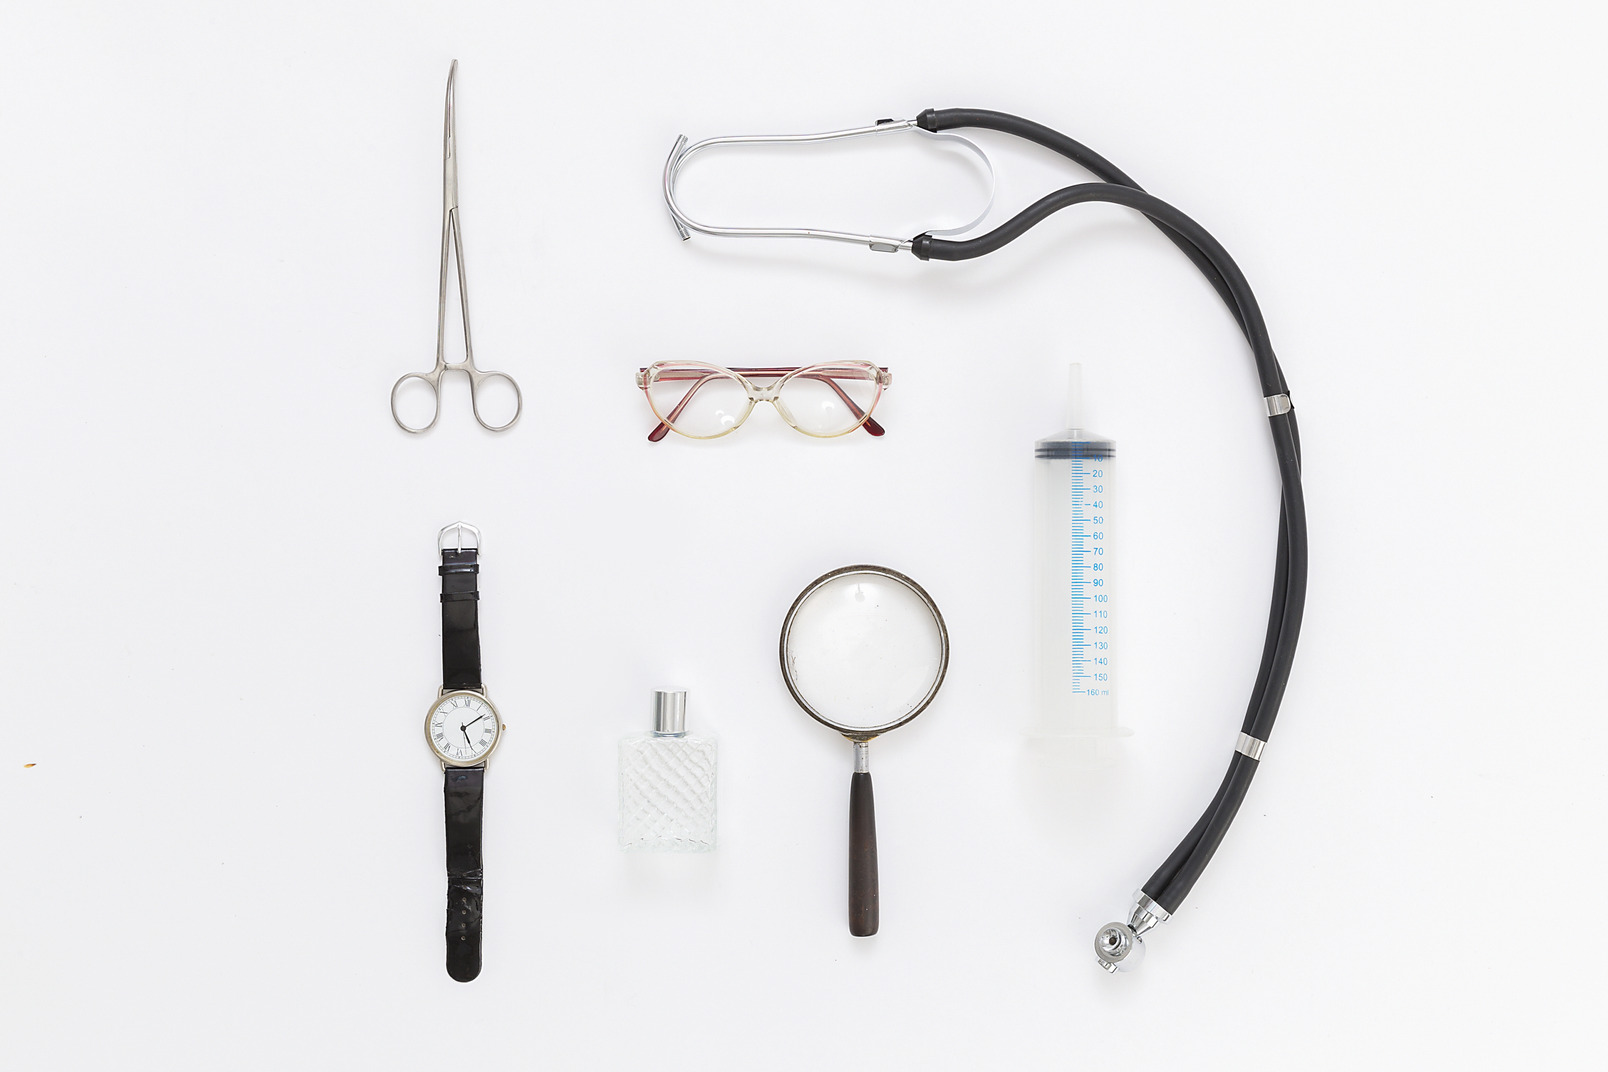 Doctor's kit tools